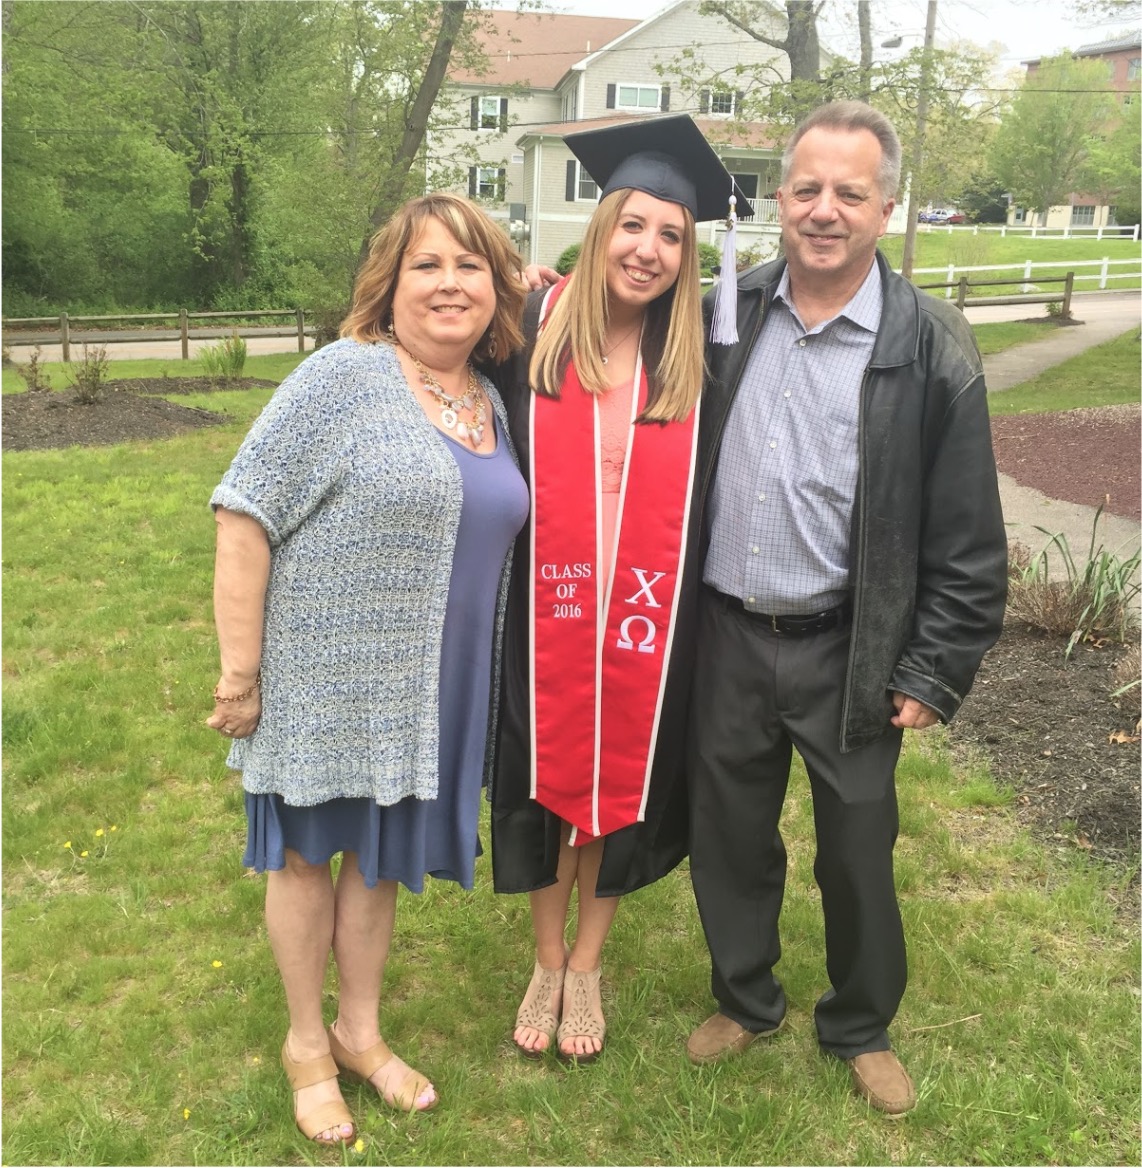 Shannon and her parents celebrate her graduation from URI in 2016.